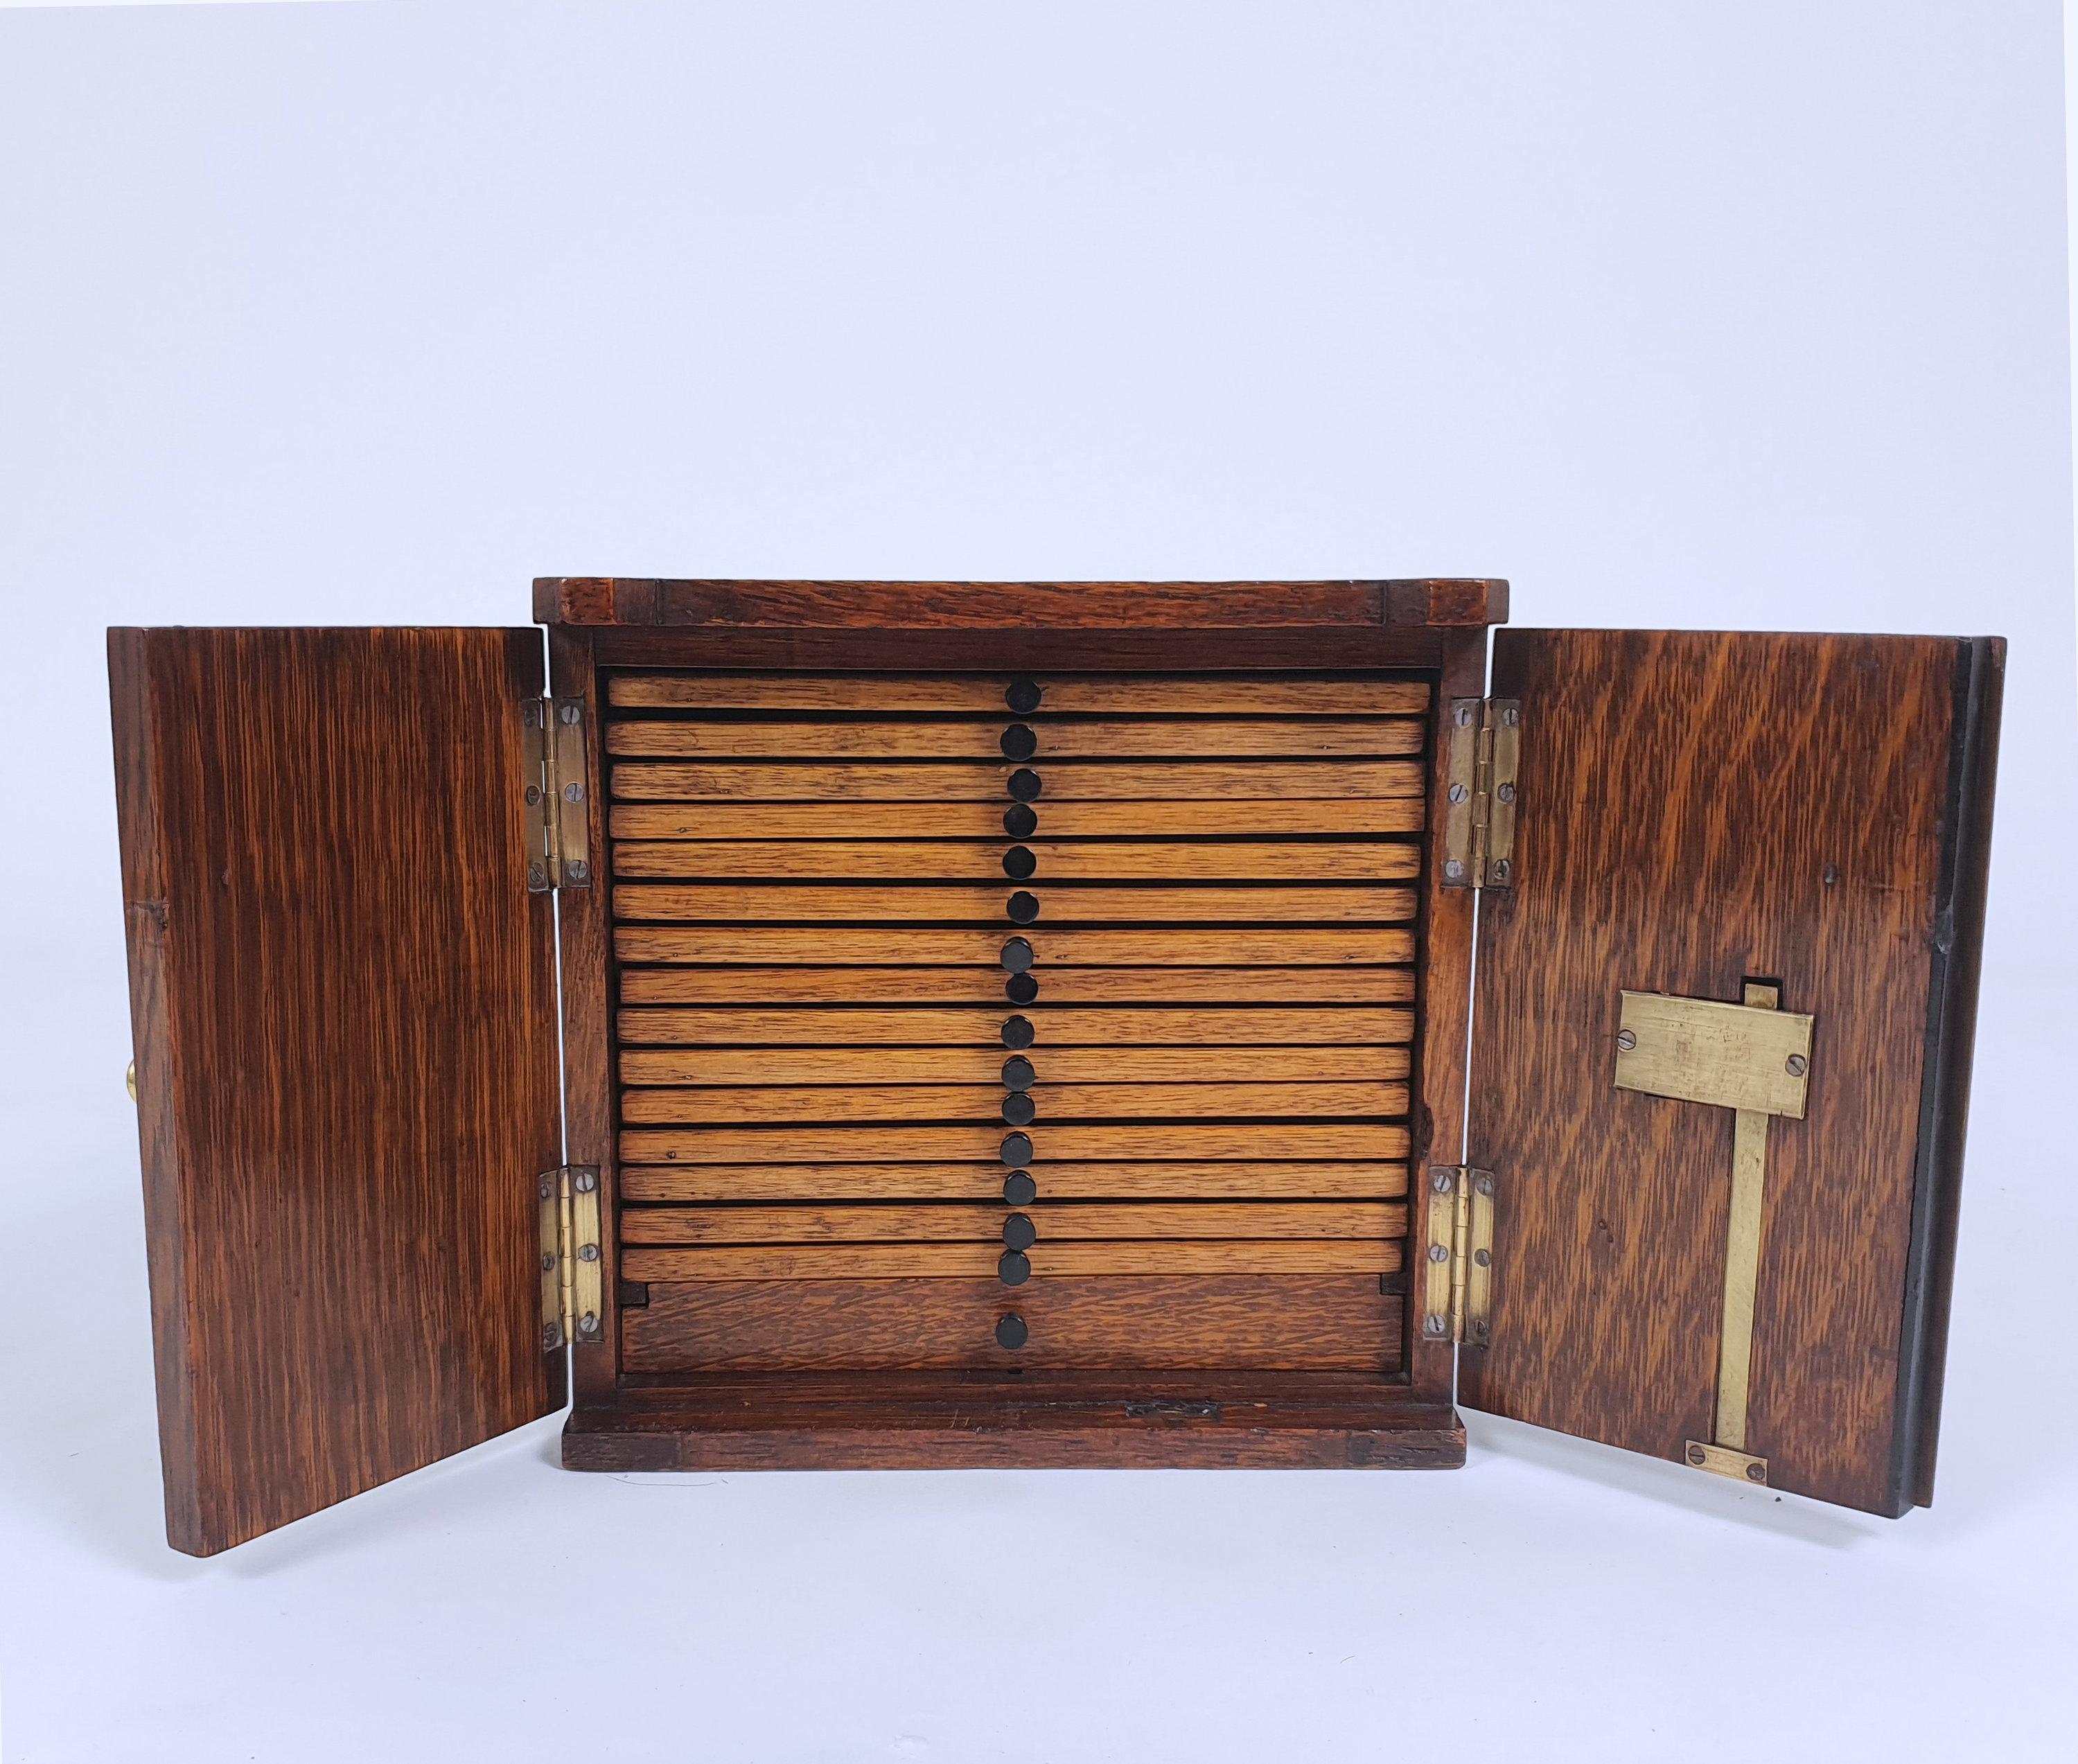 This superb quality Victorian oak collector’s cabinet is in the form of a Chubb safe with brass mounts. The cabinet has 16 drawers, all with embossed handles. It measures 10 in, 25.5 cm wide, 7 ½ in, 19 cm deep and 9 ¾ in, 24.8 cm in height. This